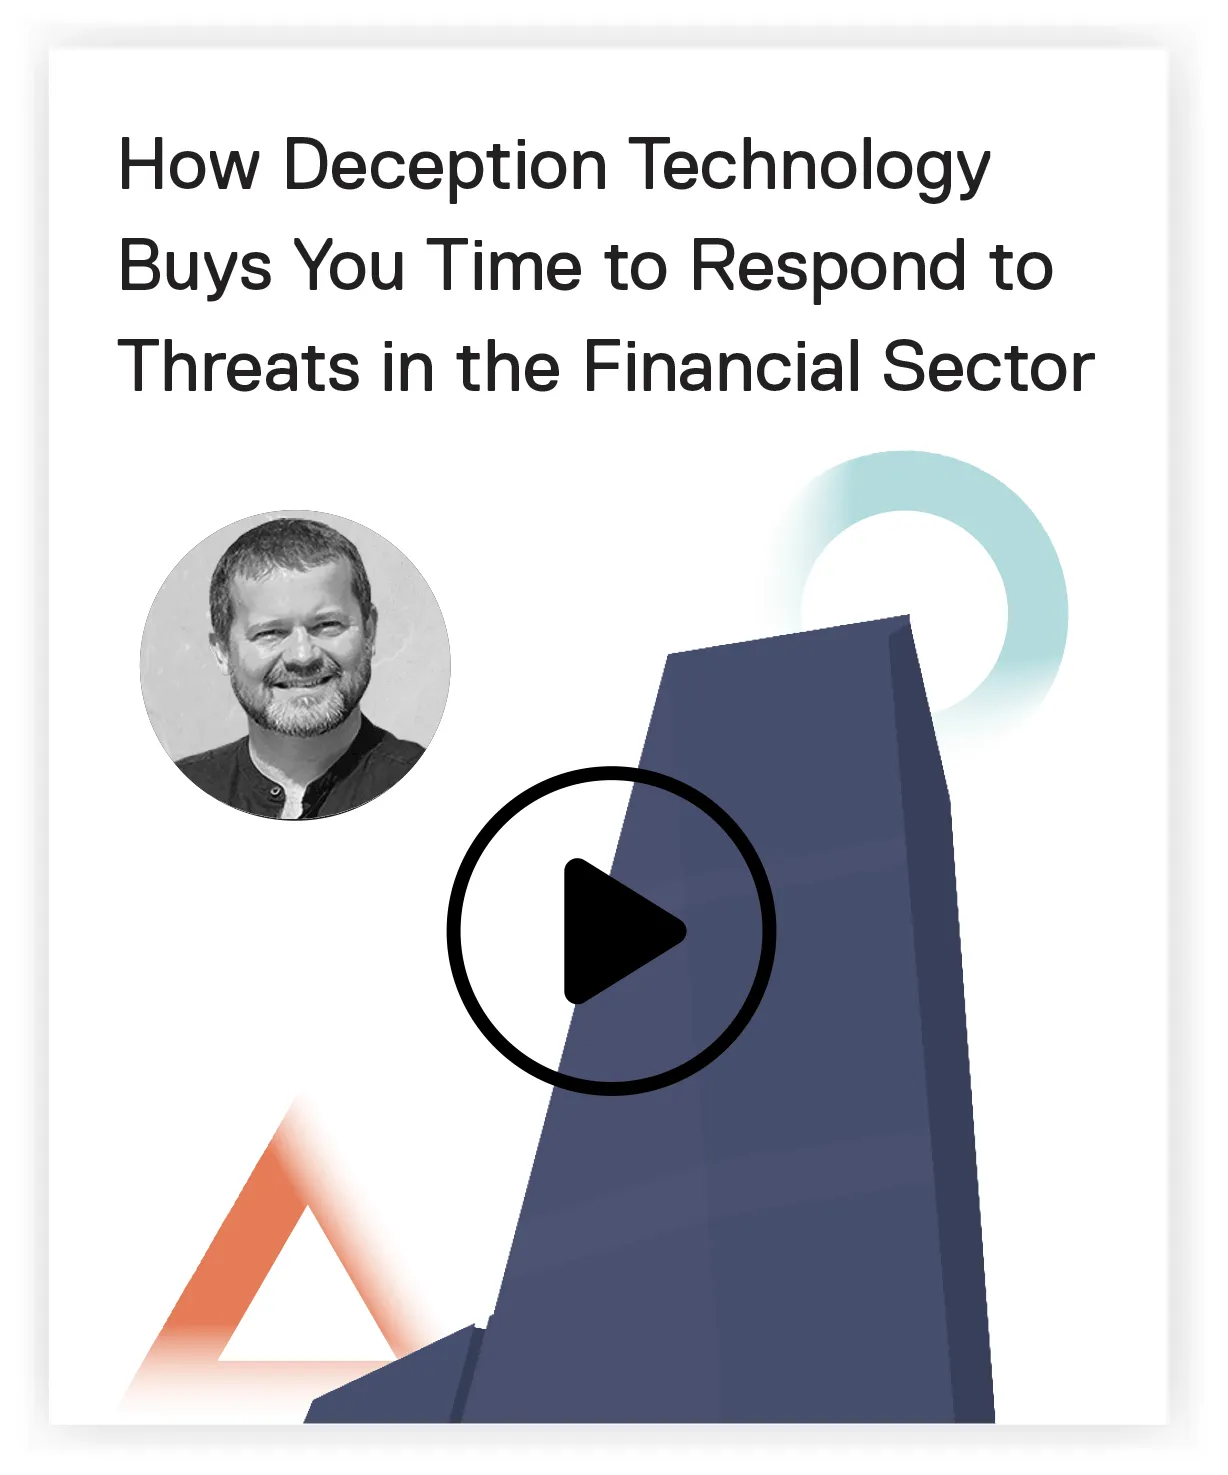 How deception technology buys you time to respond to threats in the financial sector?